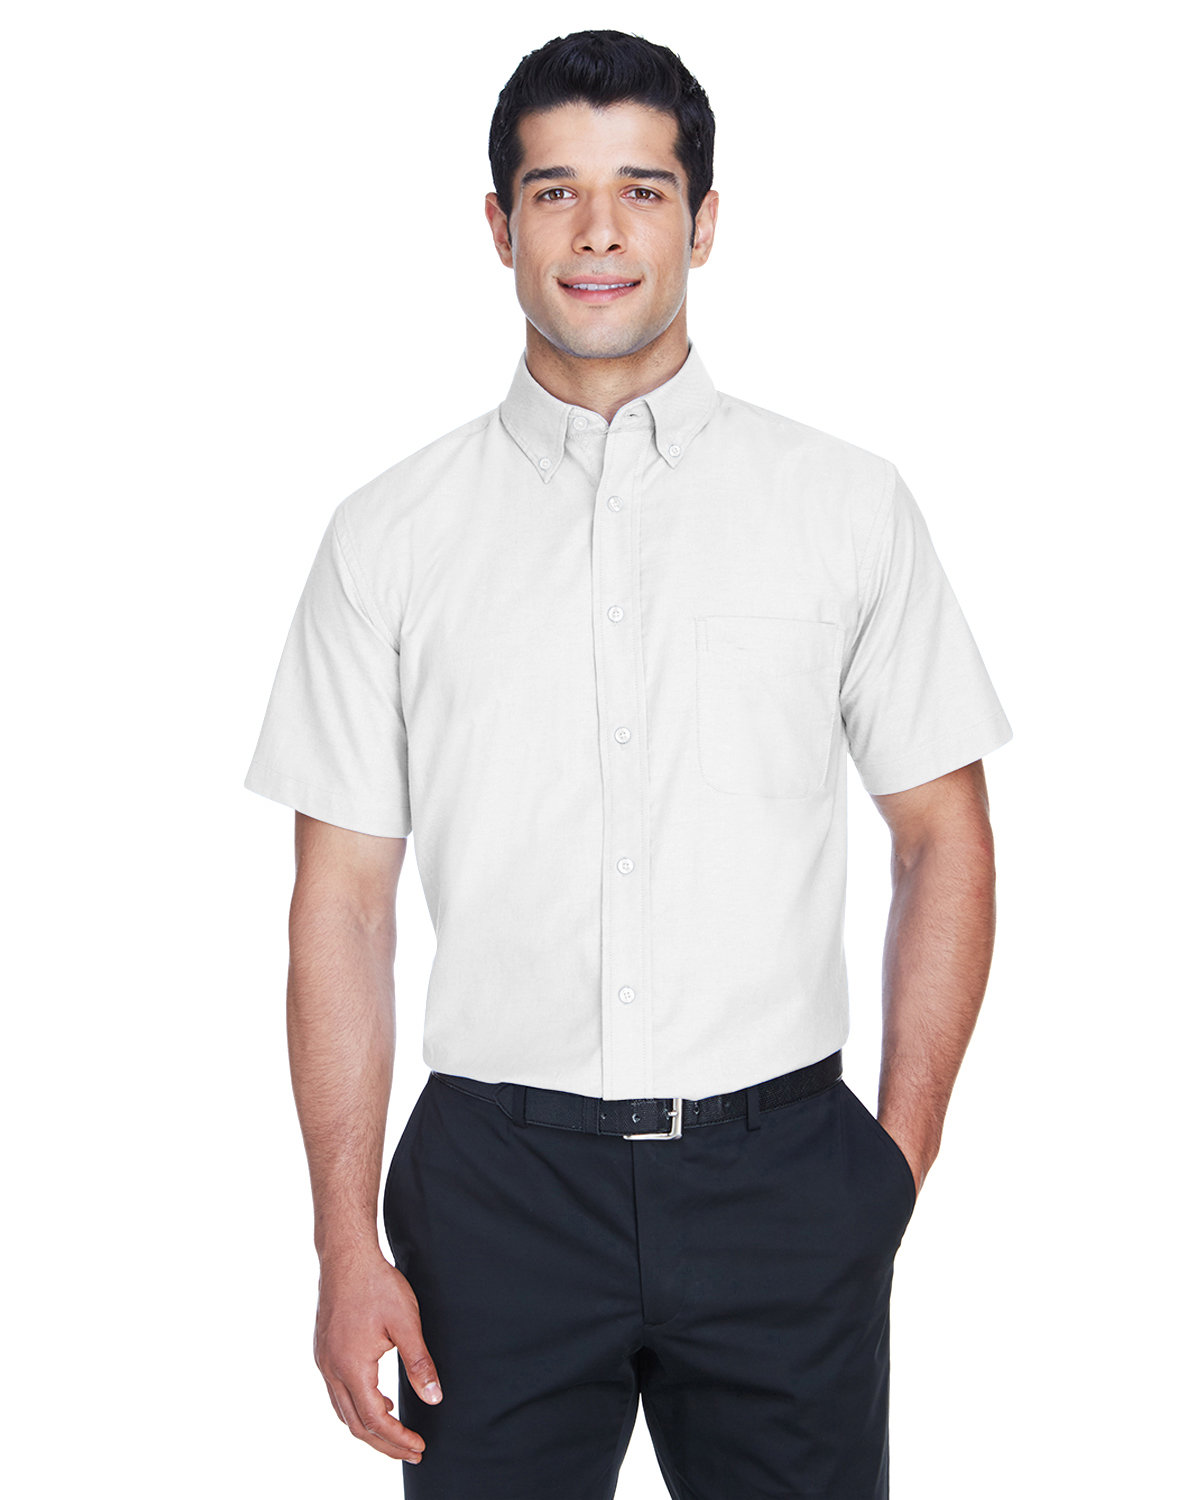 Men's Short-Sleeve Oxford with Stain-Release - M600S